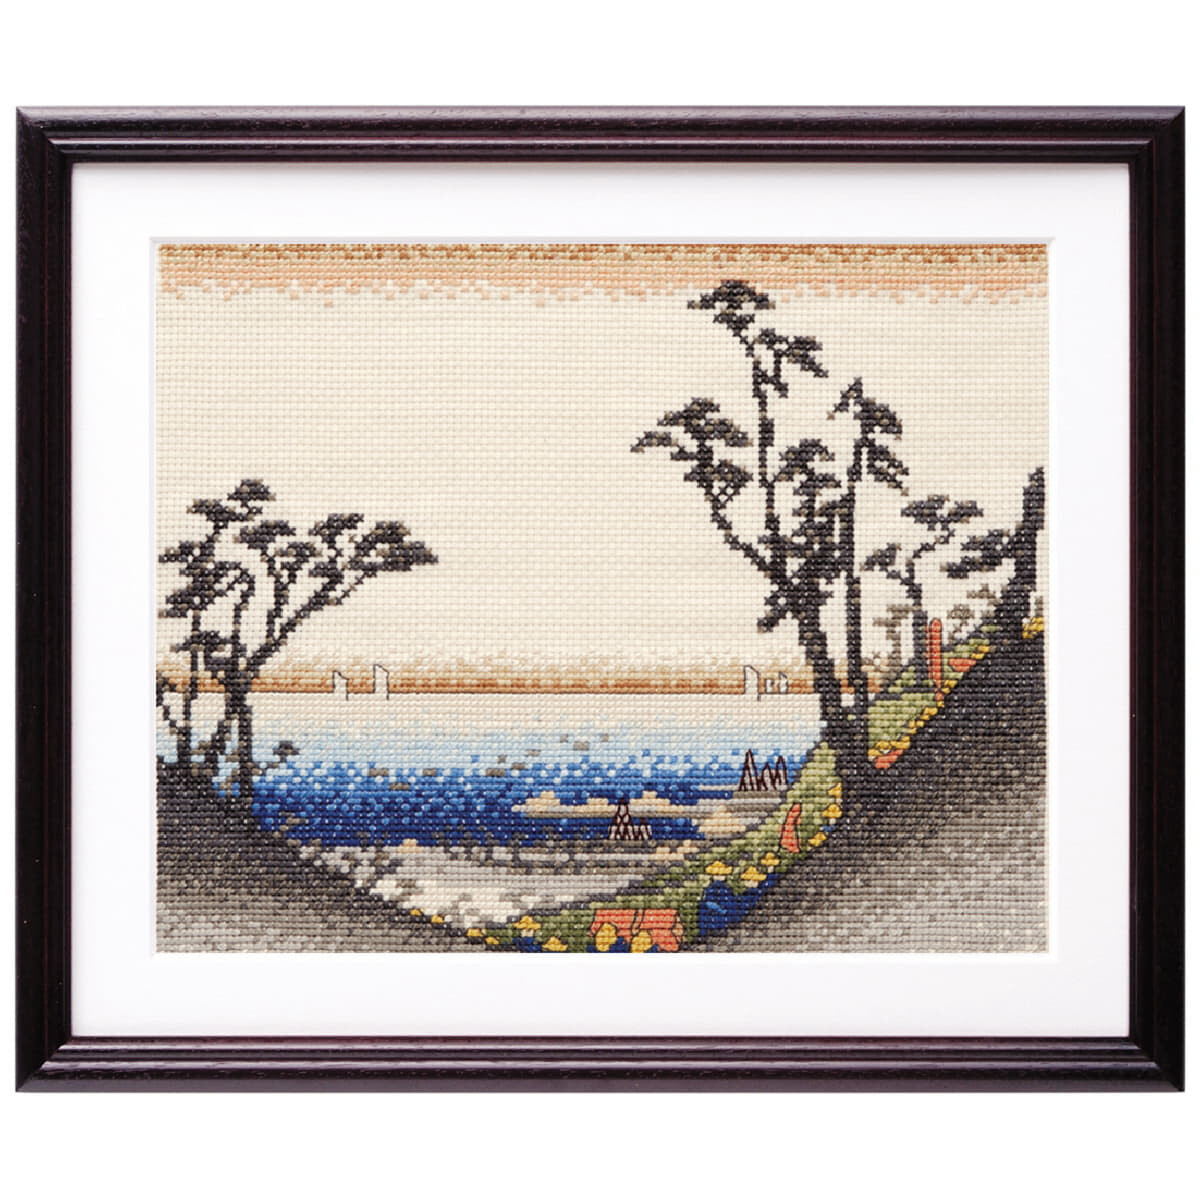 Olympus counted cross stitch kit "View Of Shiomi...